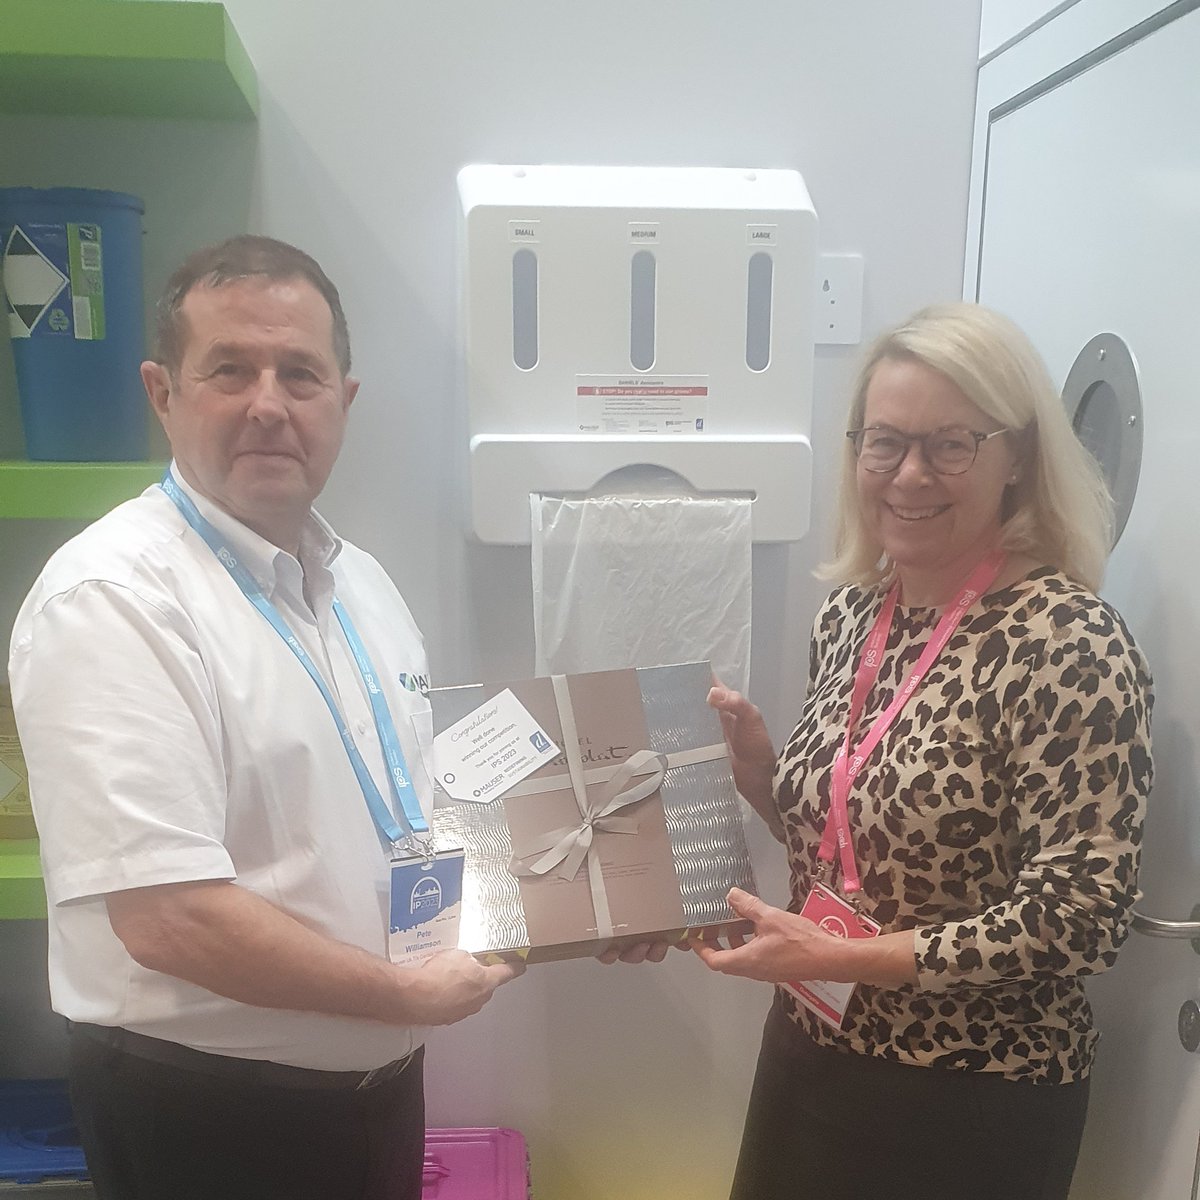 The winner of yesterday's prize is the wonderful Jeanette Thomas Thank you for coming by to collect your prize and having a photo taken with our brilliant @peteWatdaniels We hope you enjoy the choccies! #IP2023Conf #IP2023